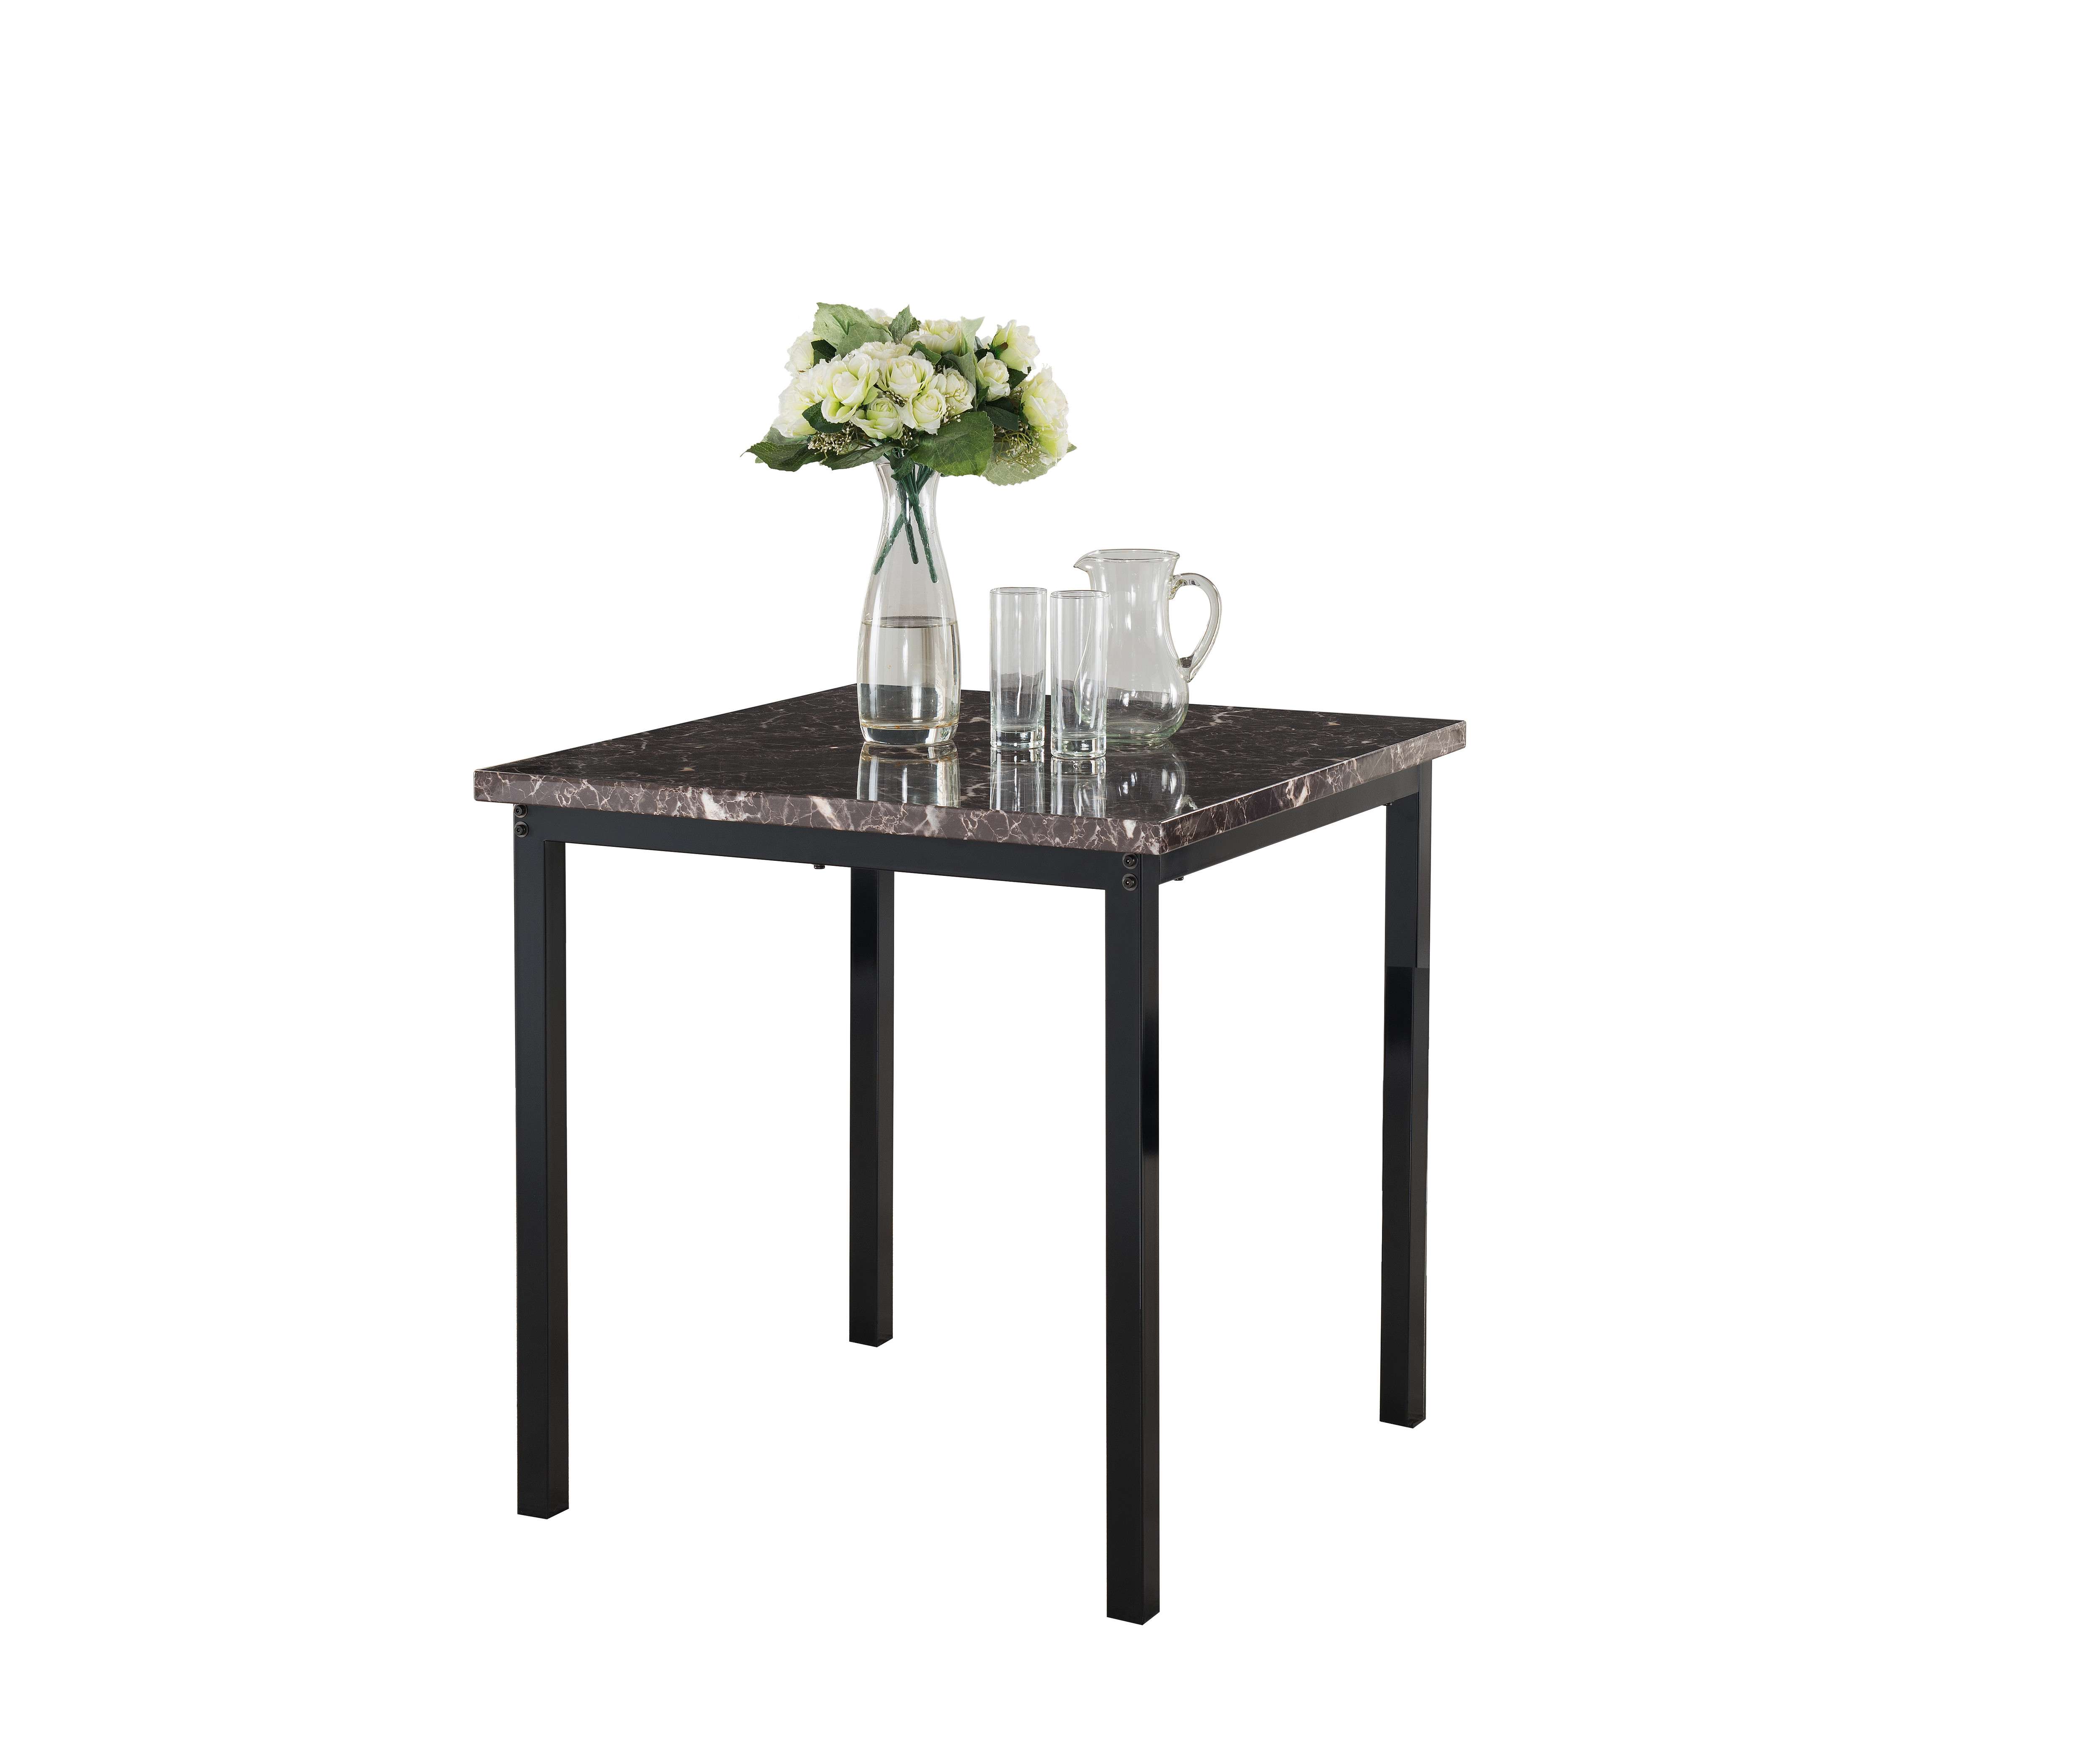 Pilaster Designs - Black Metal / Marble Finish Top Square Dining Room - Kitchen Table (30 x 30)